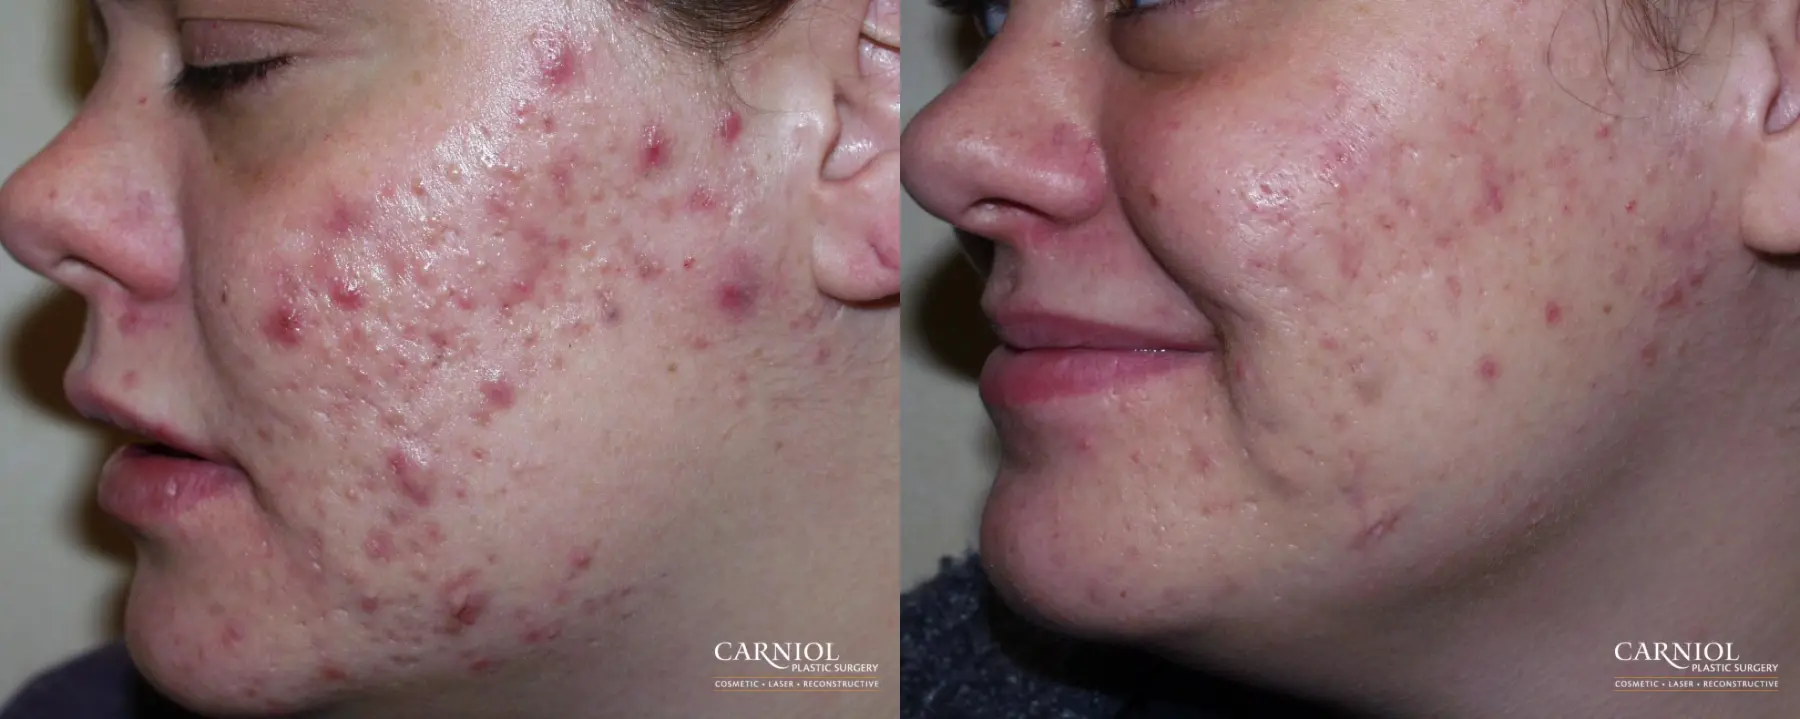 Acne Rejuvenation: Patient 1 - Before and After 1